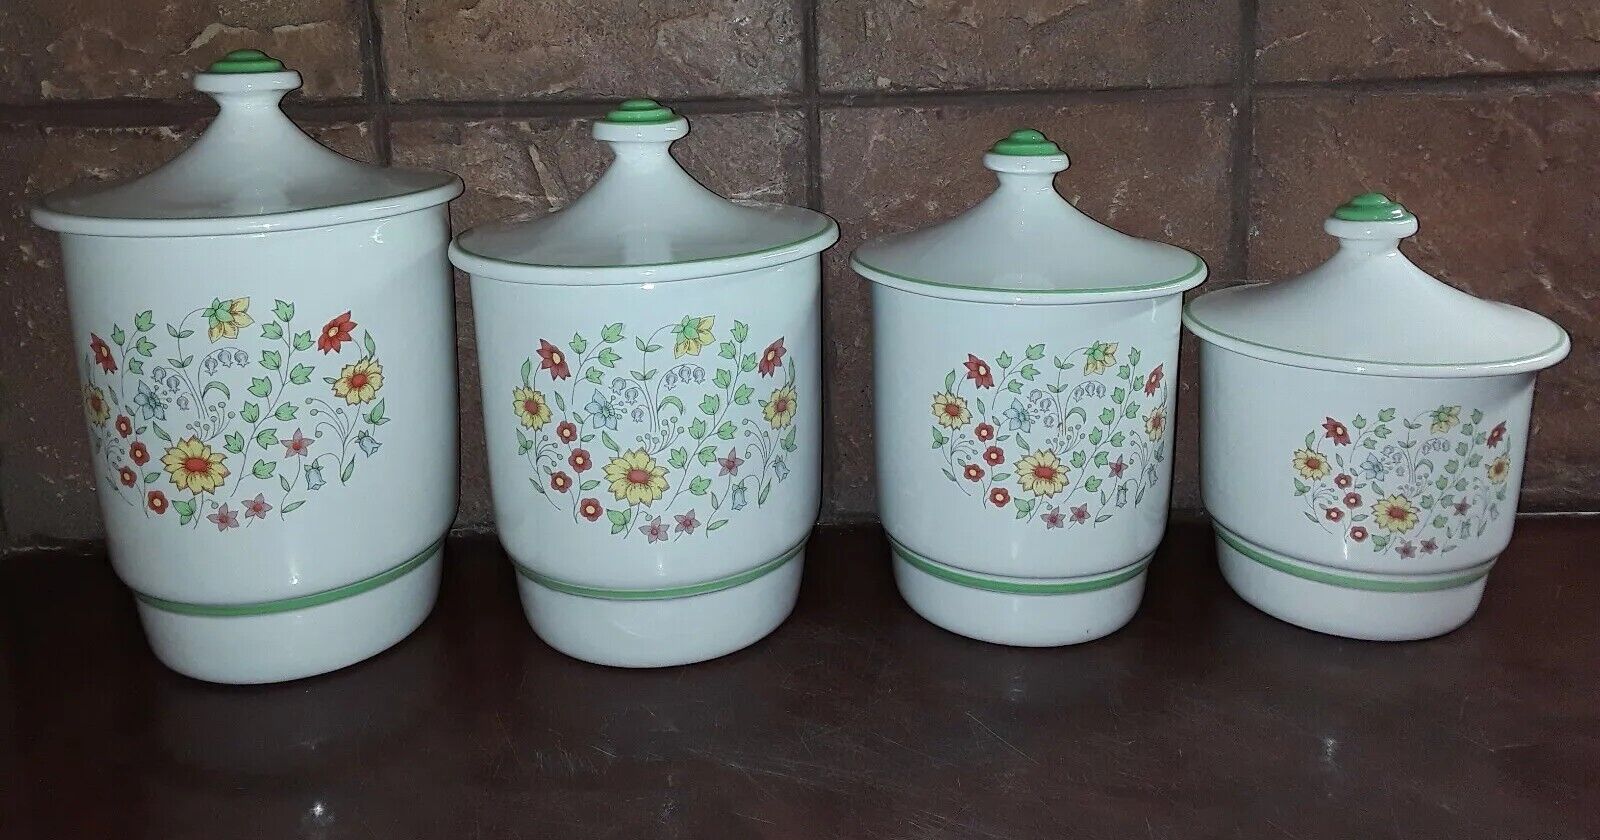 Wildflowers Canisters Ceramic 4 PC Set White Green Vintage 